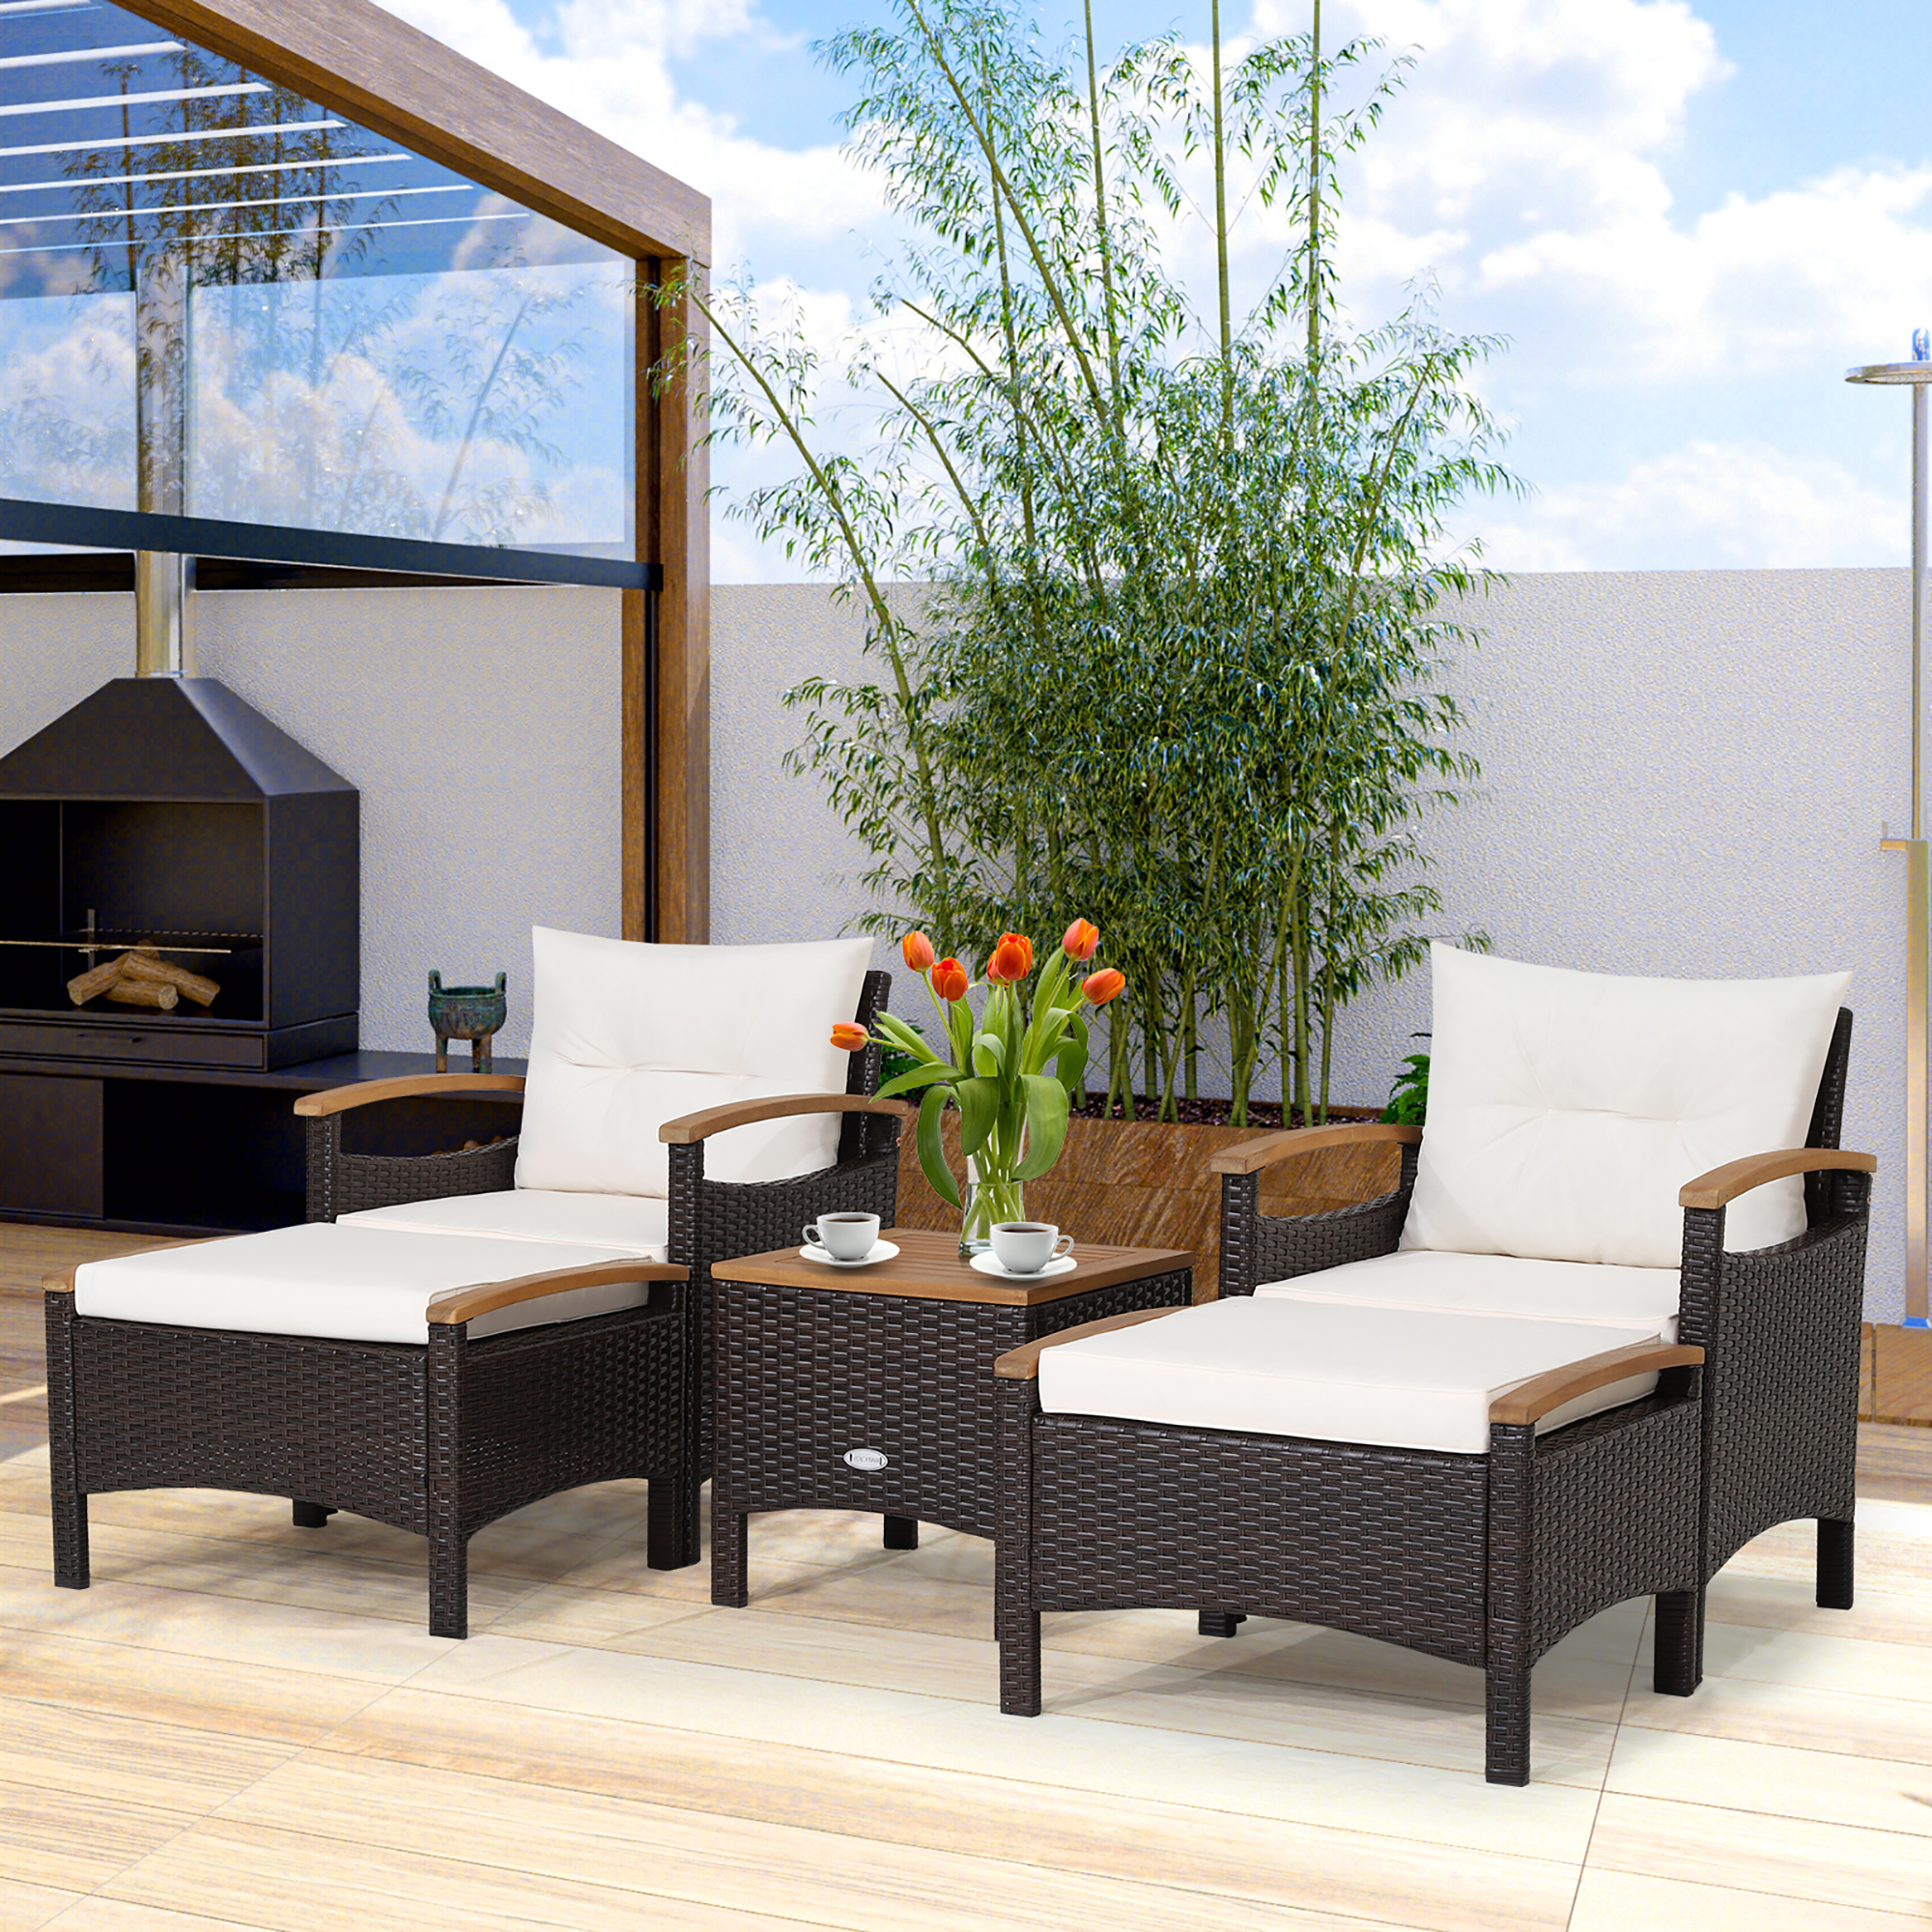 Gymax 5PCS Outdoor Patio Rattan Furniture Set PE Wicker Lounge Chair w/ Wood Tabletop - image 3 of 10